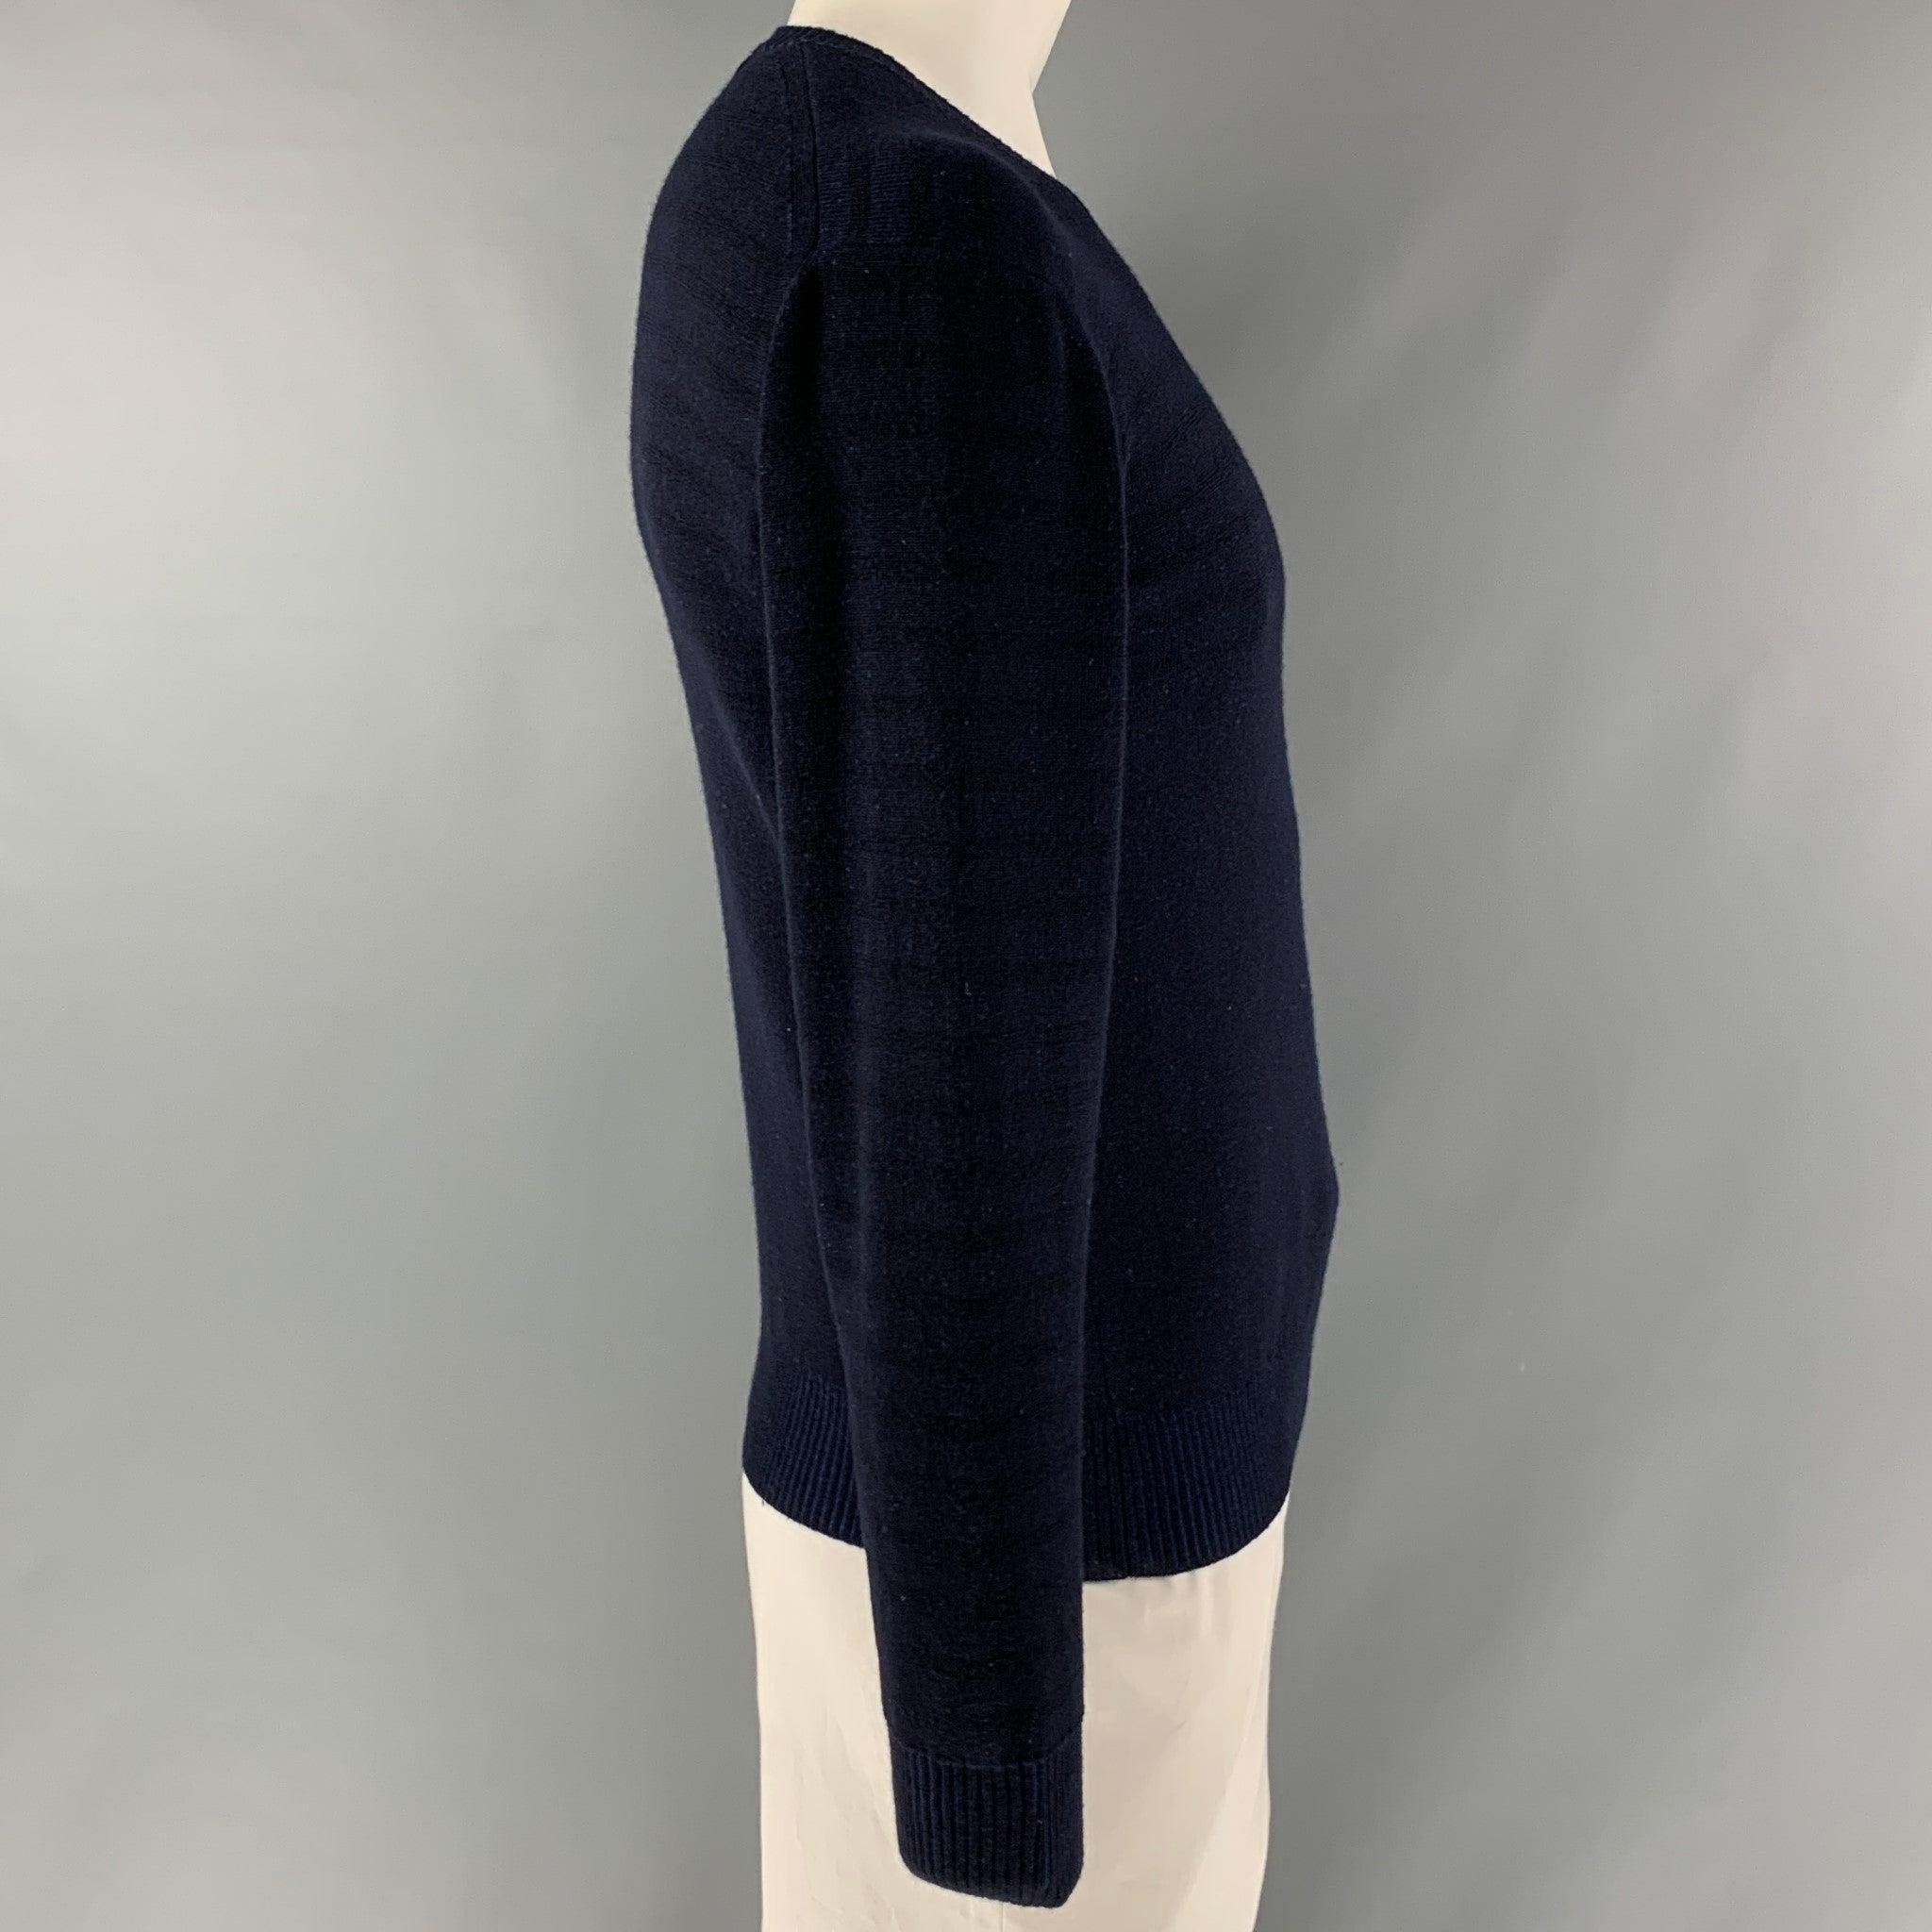 JUNYA WATANABE long sleeve pullover comes in a navy and black stripped wool blend jersey fabric featuring v-neck. Made in Japan.Very Good Pre-Owned Condition. Minor signs of wear. 

Marked:   L 

Measurements: 
 
Shoulder: 23 inches Chest: 48 inches